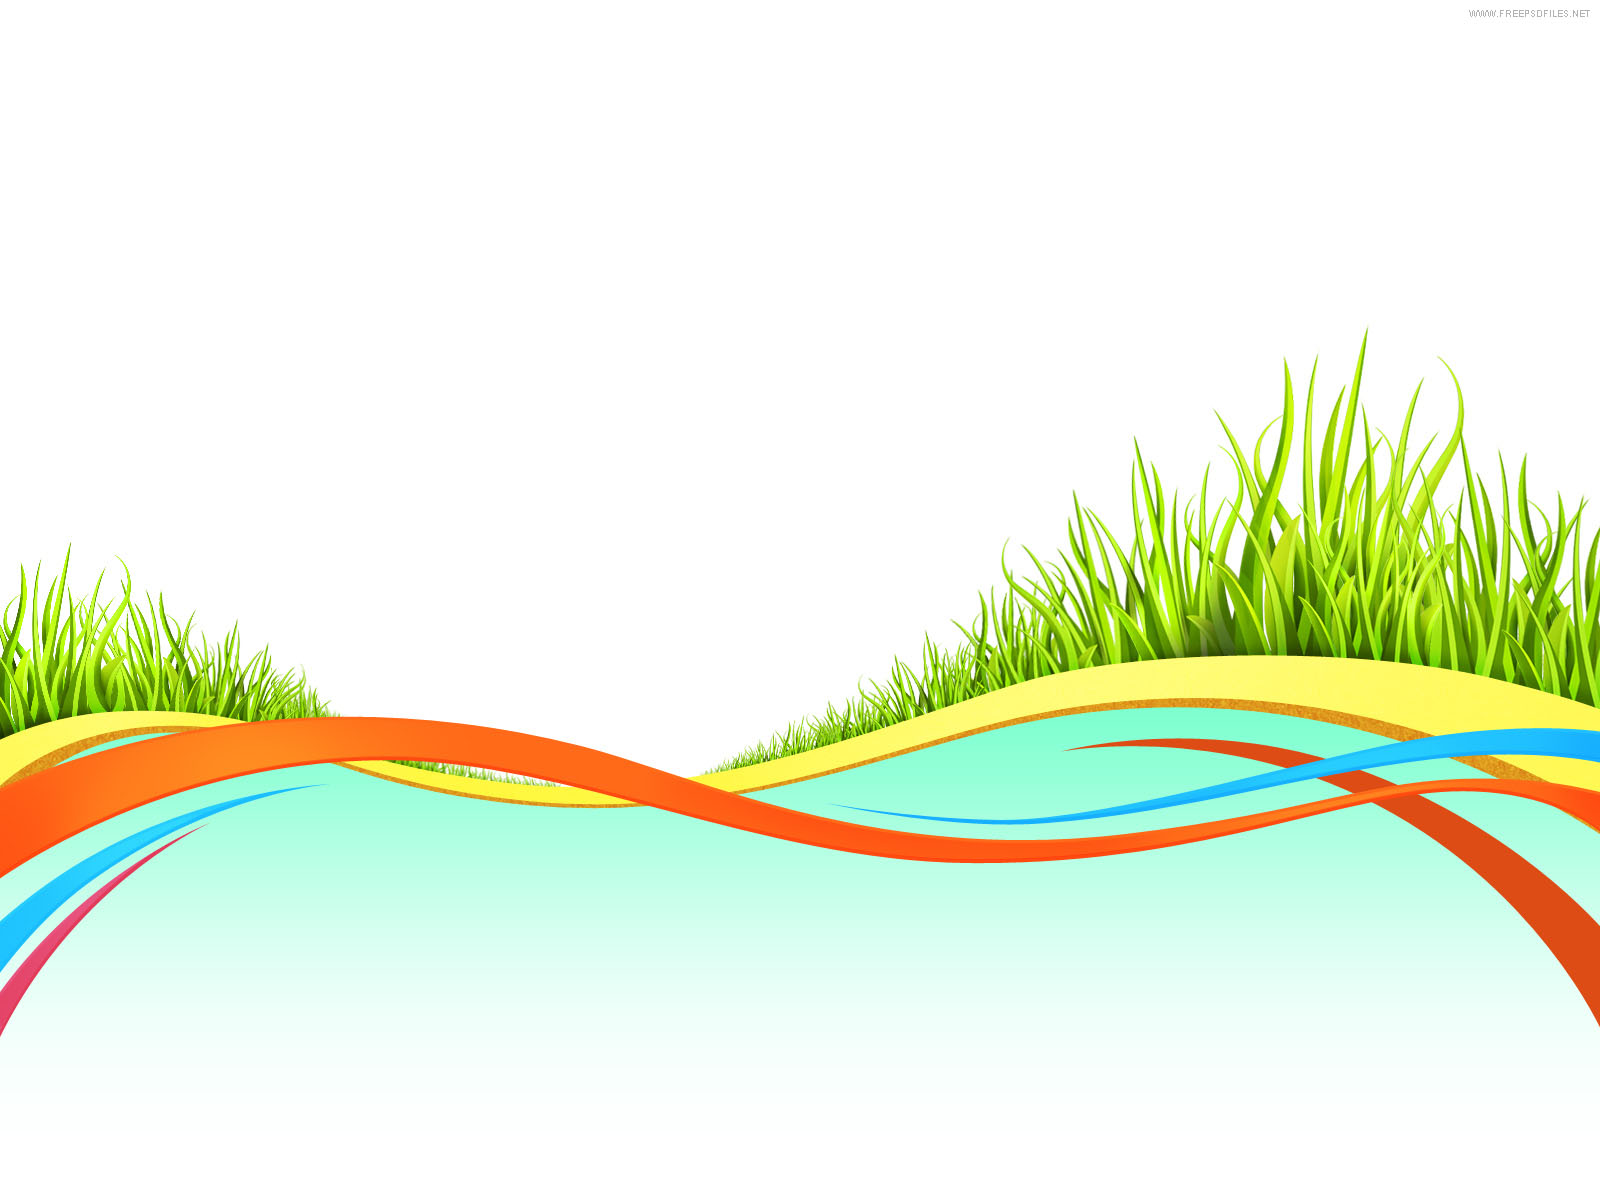 Wave backgrounds with Grass Elements PPT Backgrounds